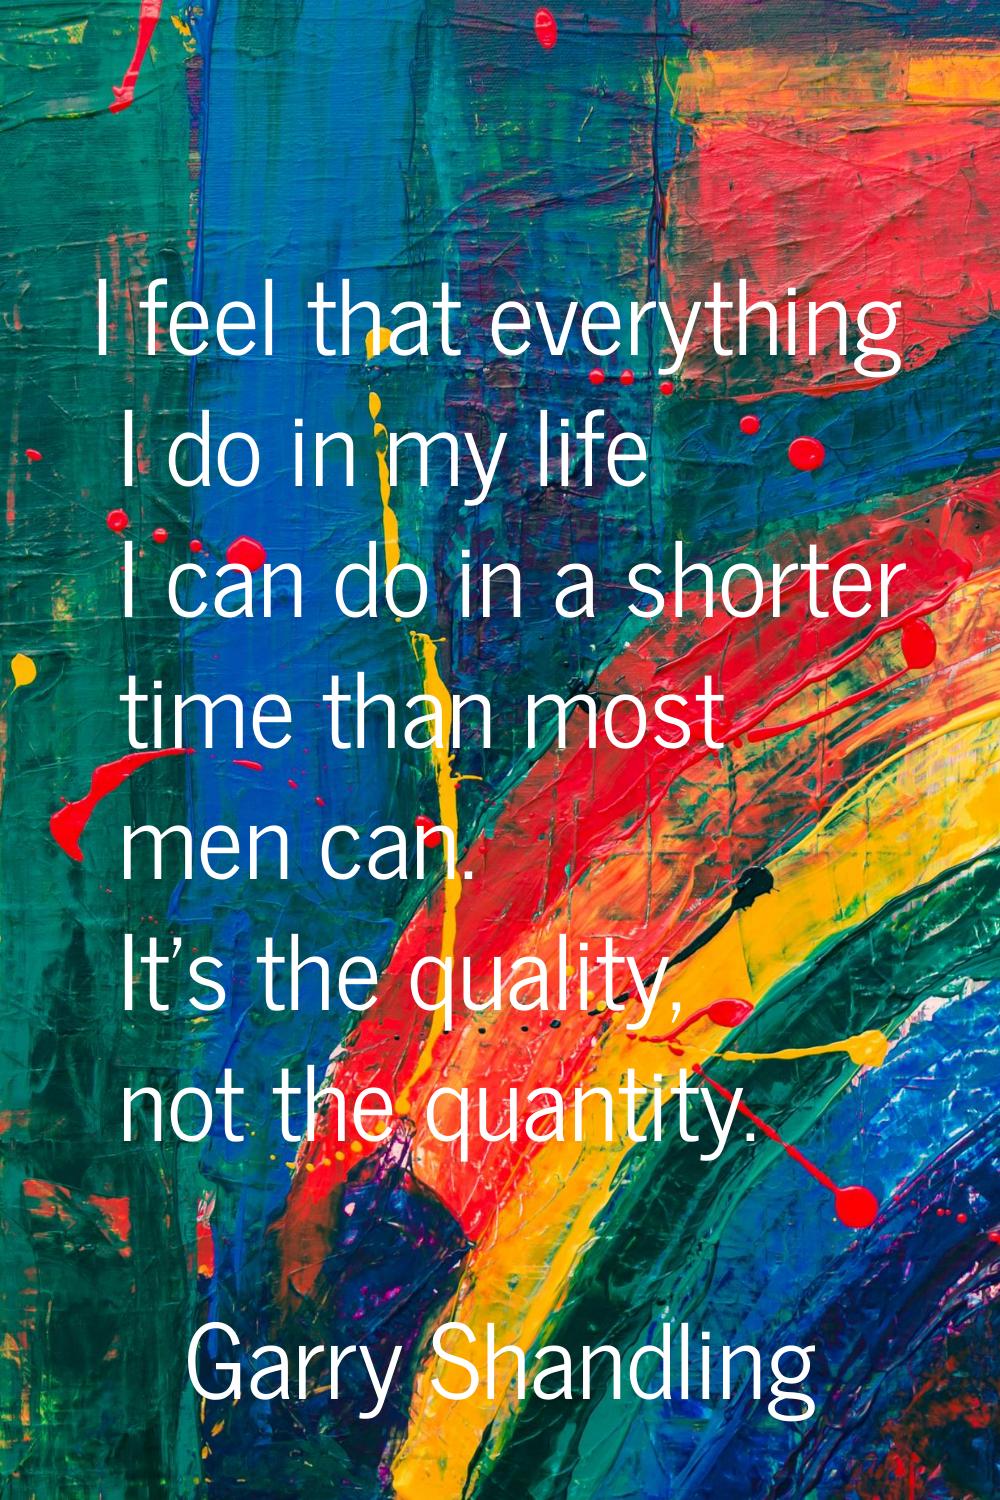 I feel that everything I do in my life I can do in a shorter time than most men can. It's the quali